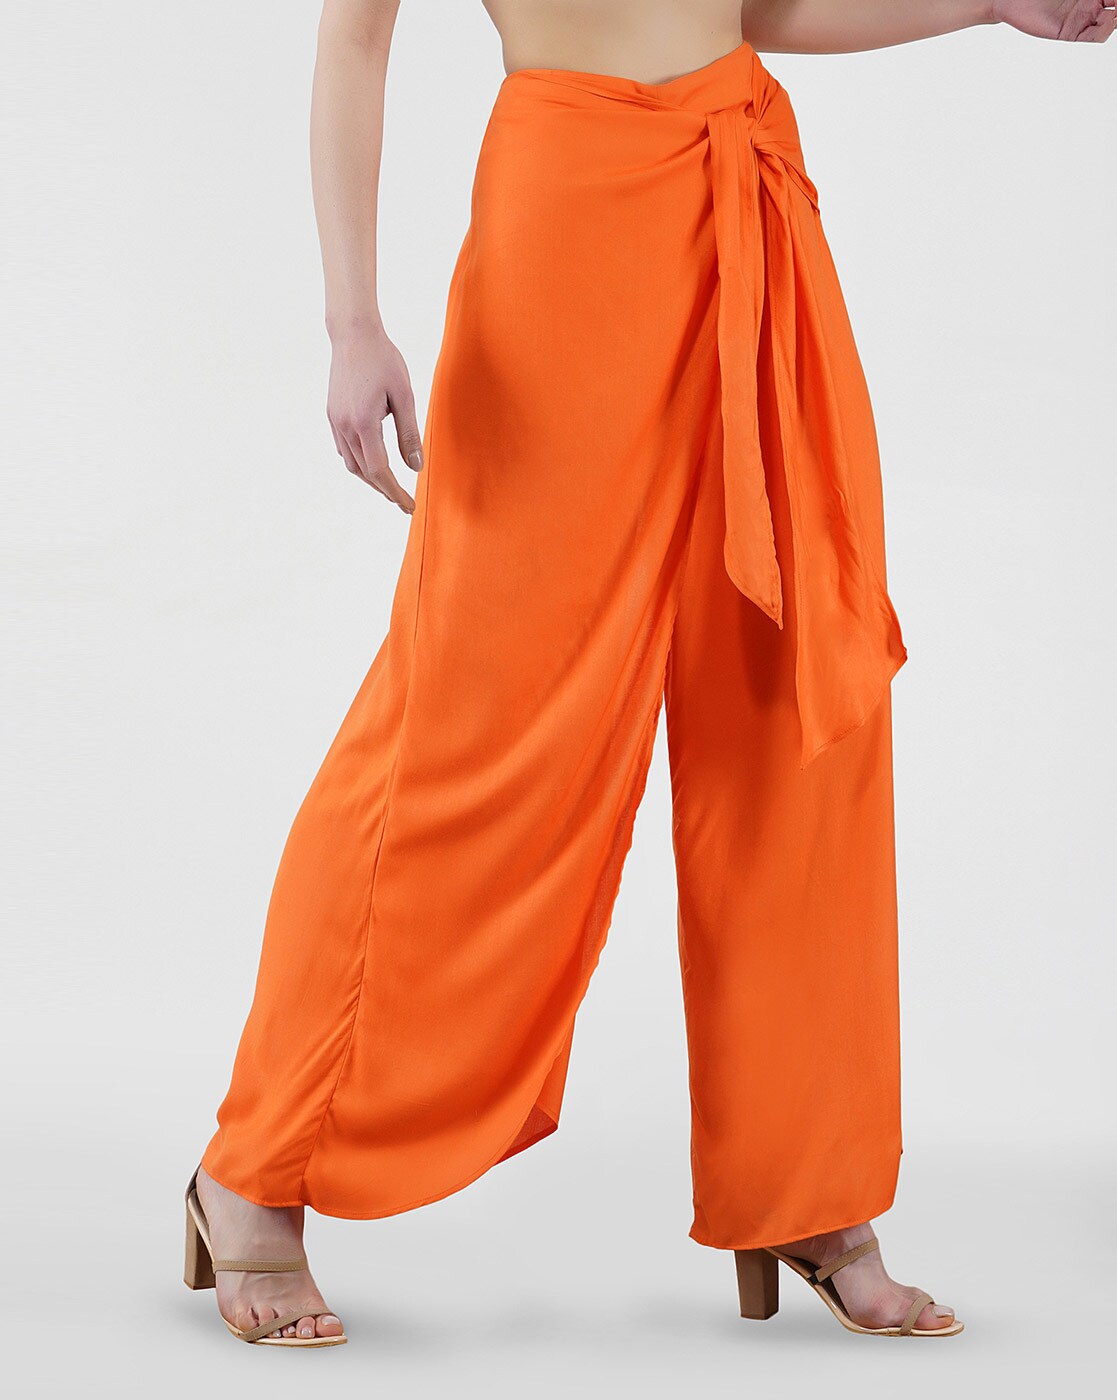 Orange Wide Leg Pants Outfits (35 ideas & outfits) | Lookastic